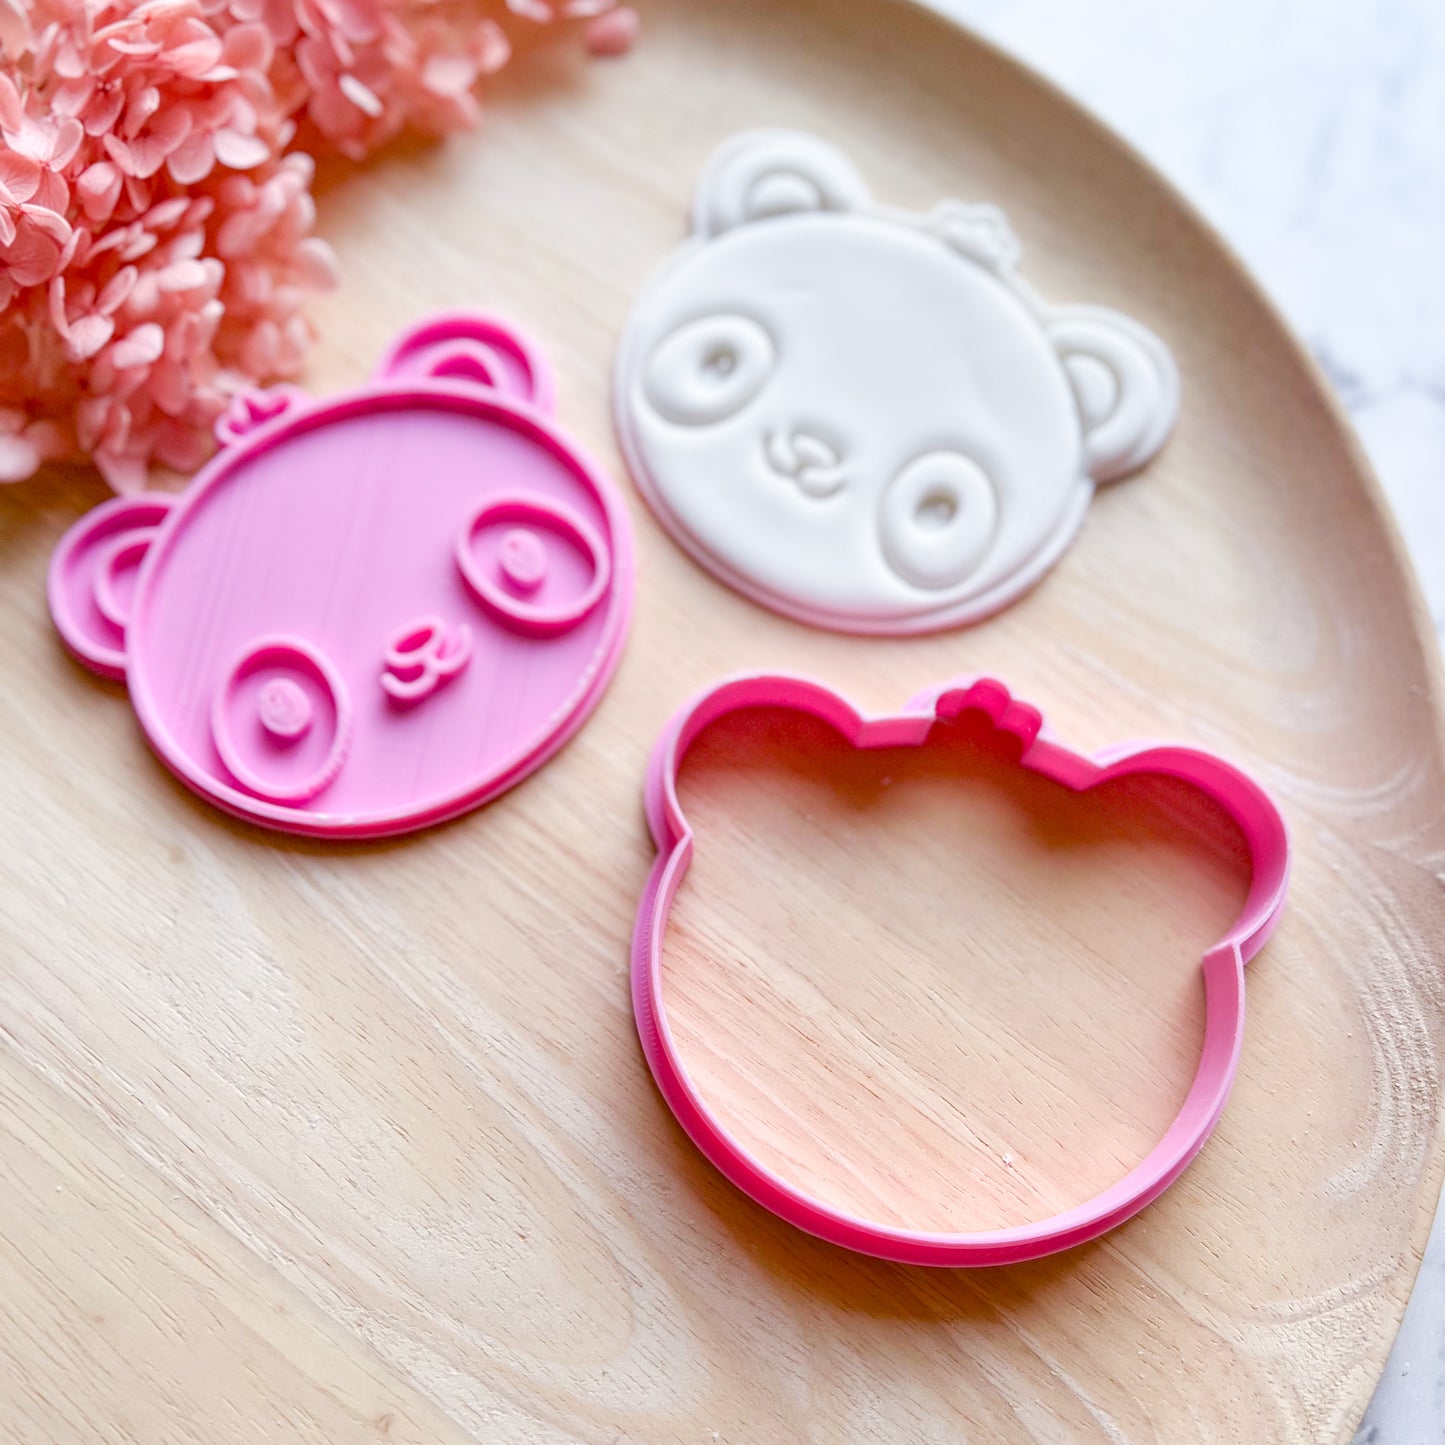 Baby Panda Cookie Cutter & Stamp